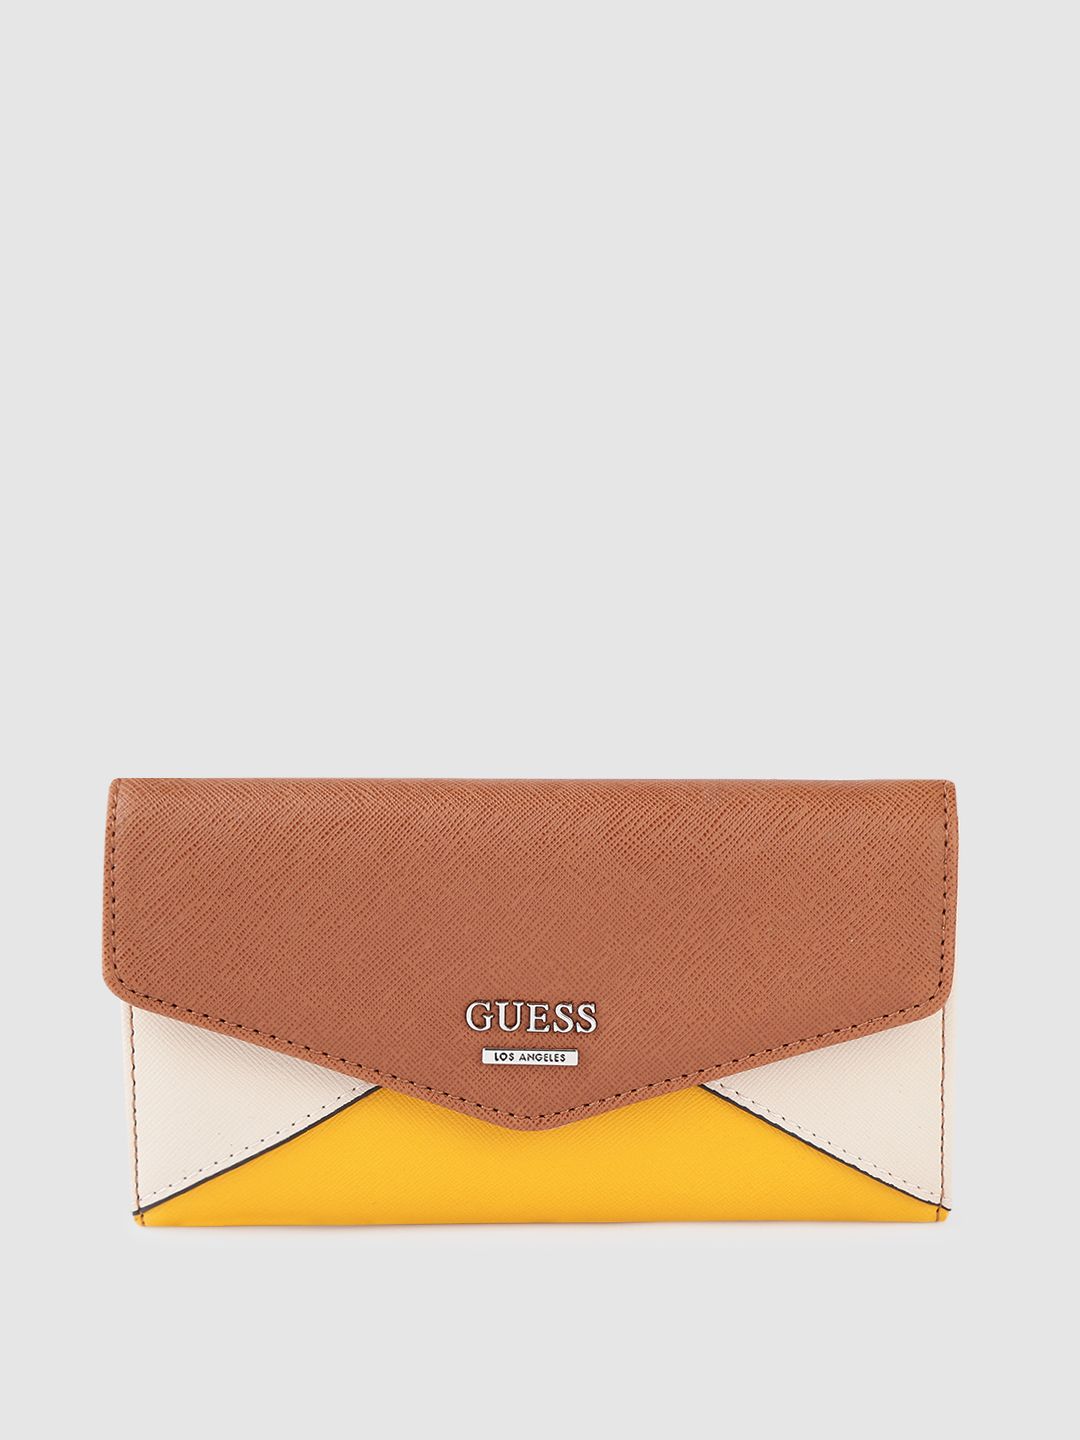 GUESS Women Tan Brown & Mustard Yellow Colourblocked Saffiano Textured Three Fold Wallet Price in India